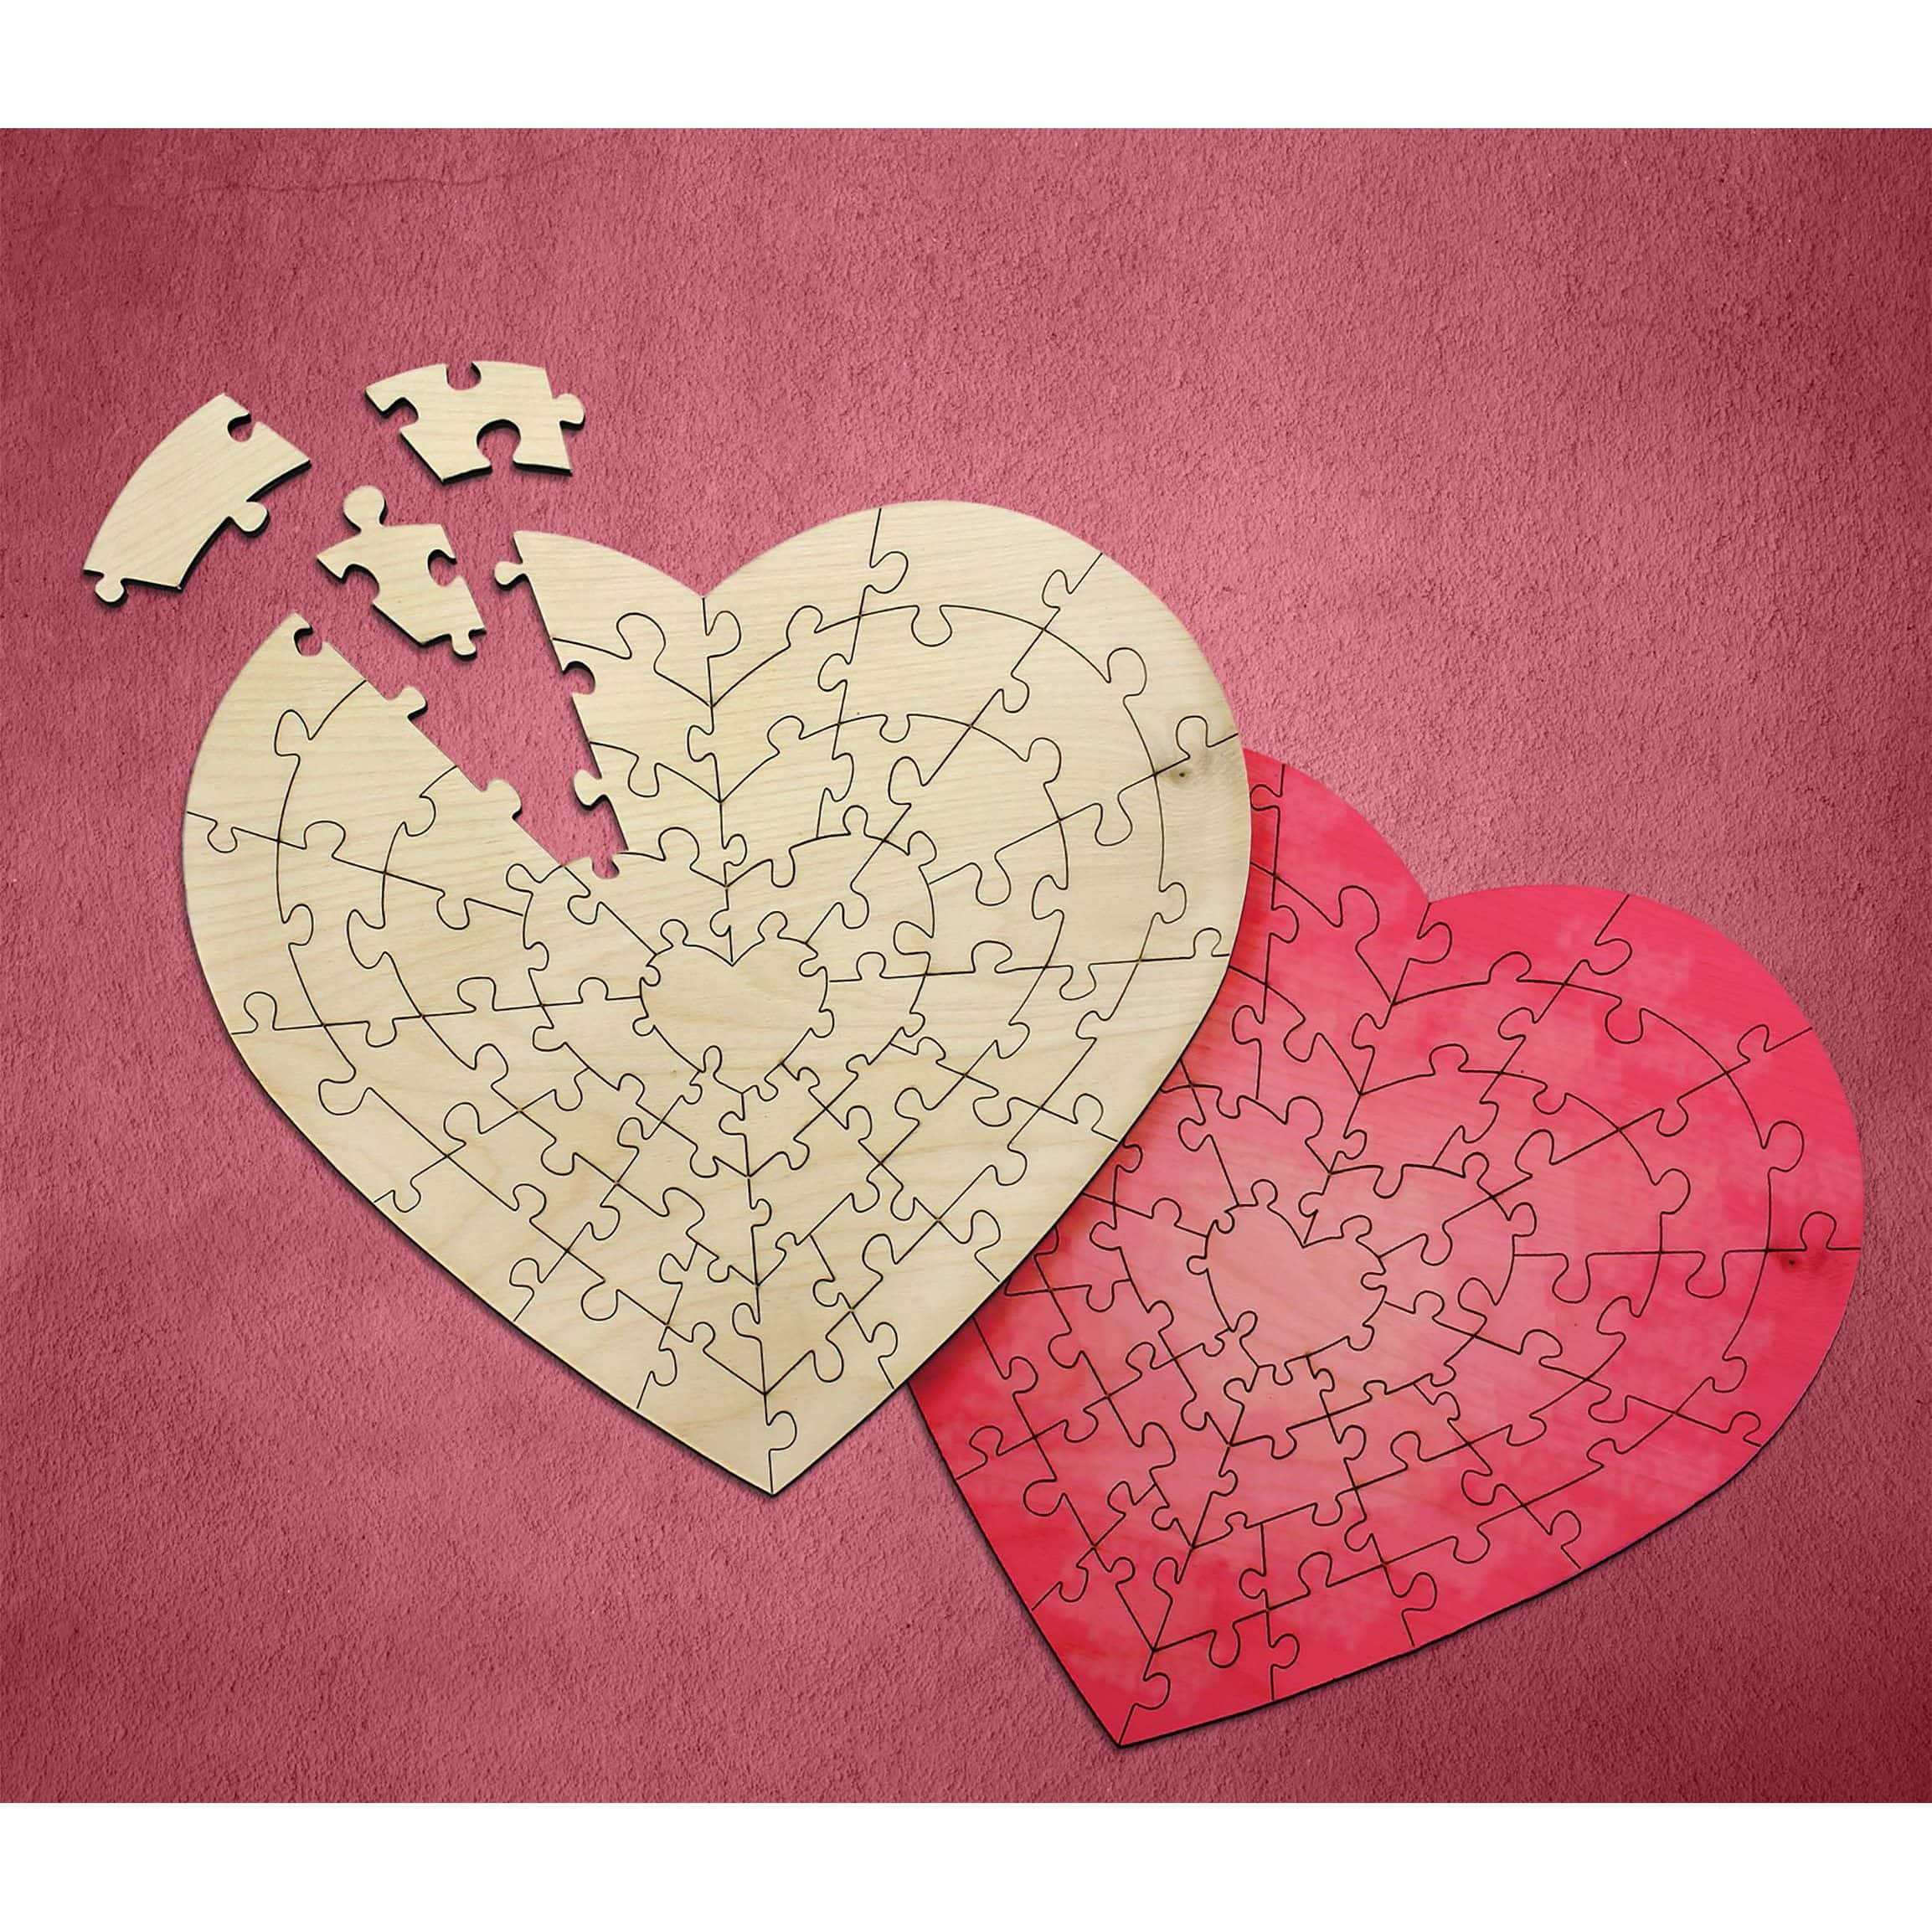 Leisure Arts&#xAE; Large Heart D.I.Y. Wood Puzzle